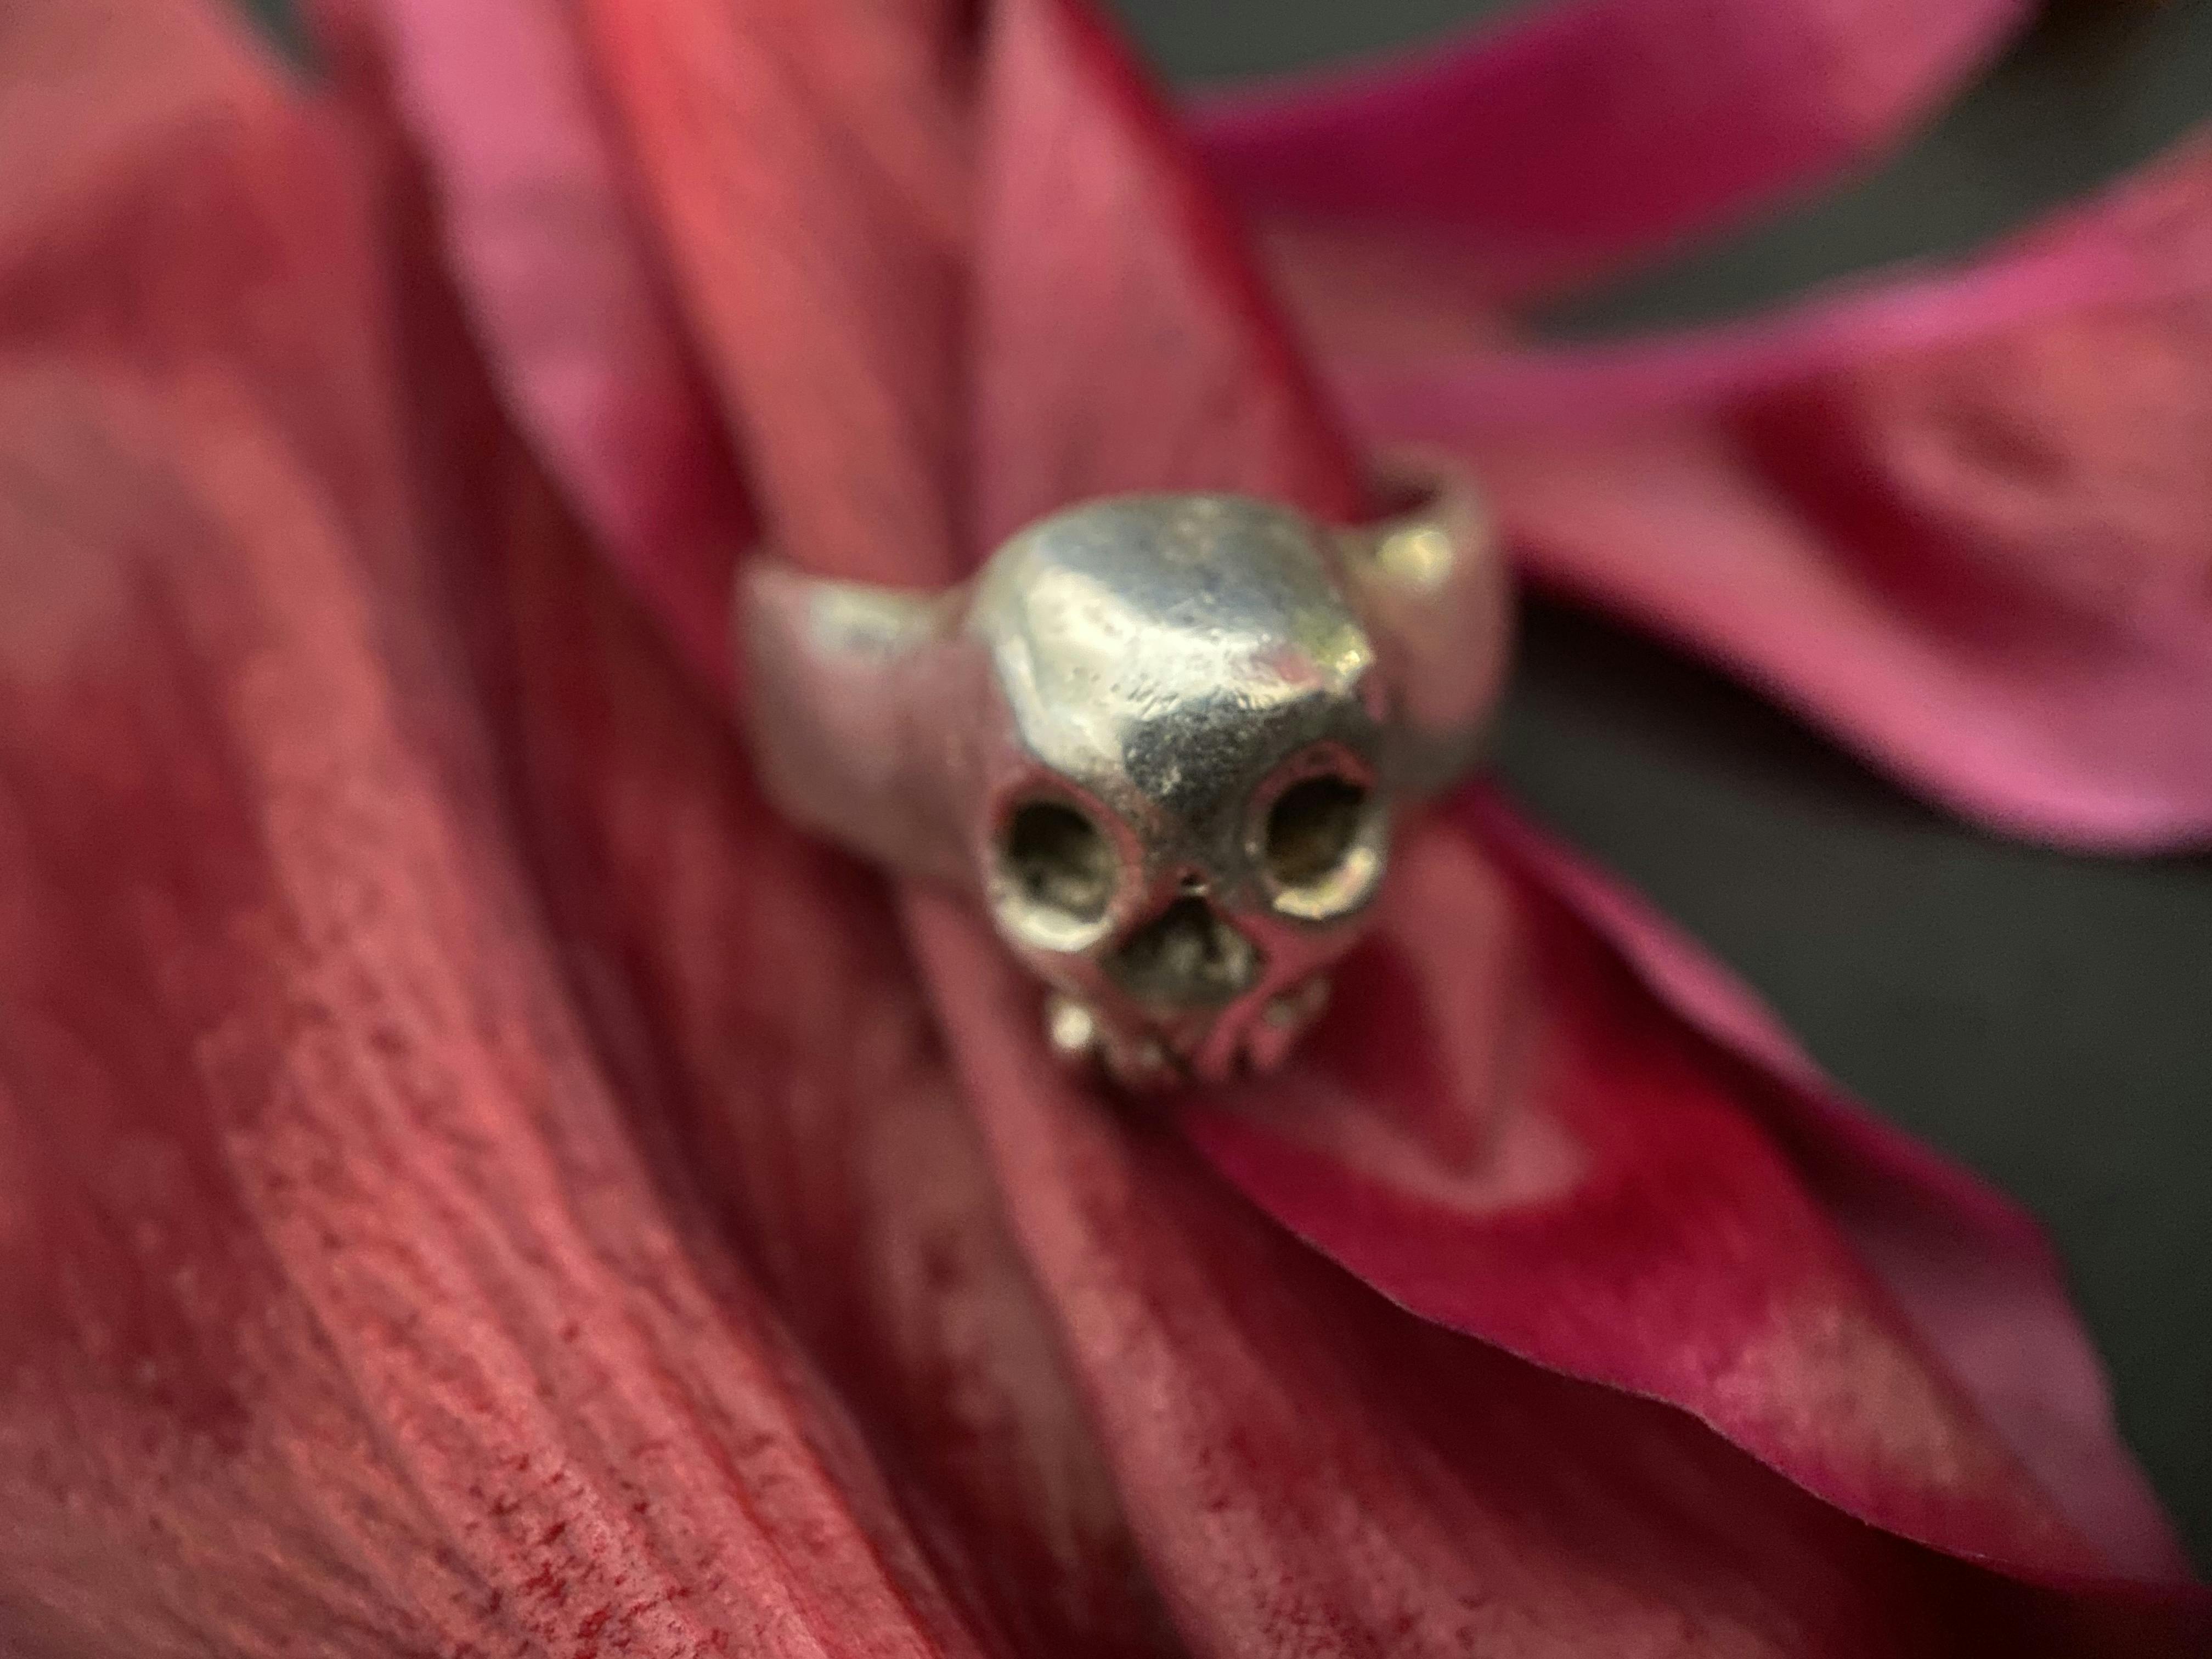 A small simple skull face on the front of a silver band, worn on a flower petal like a ring 